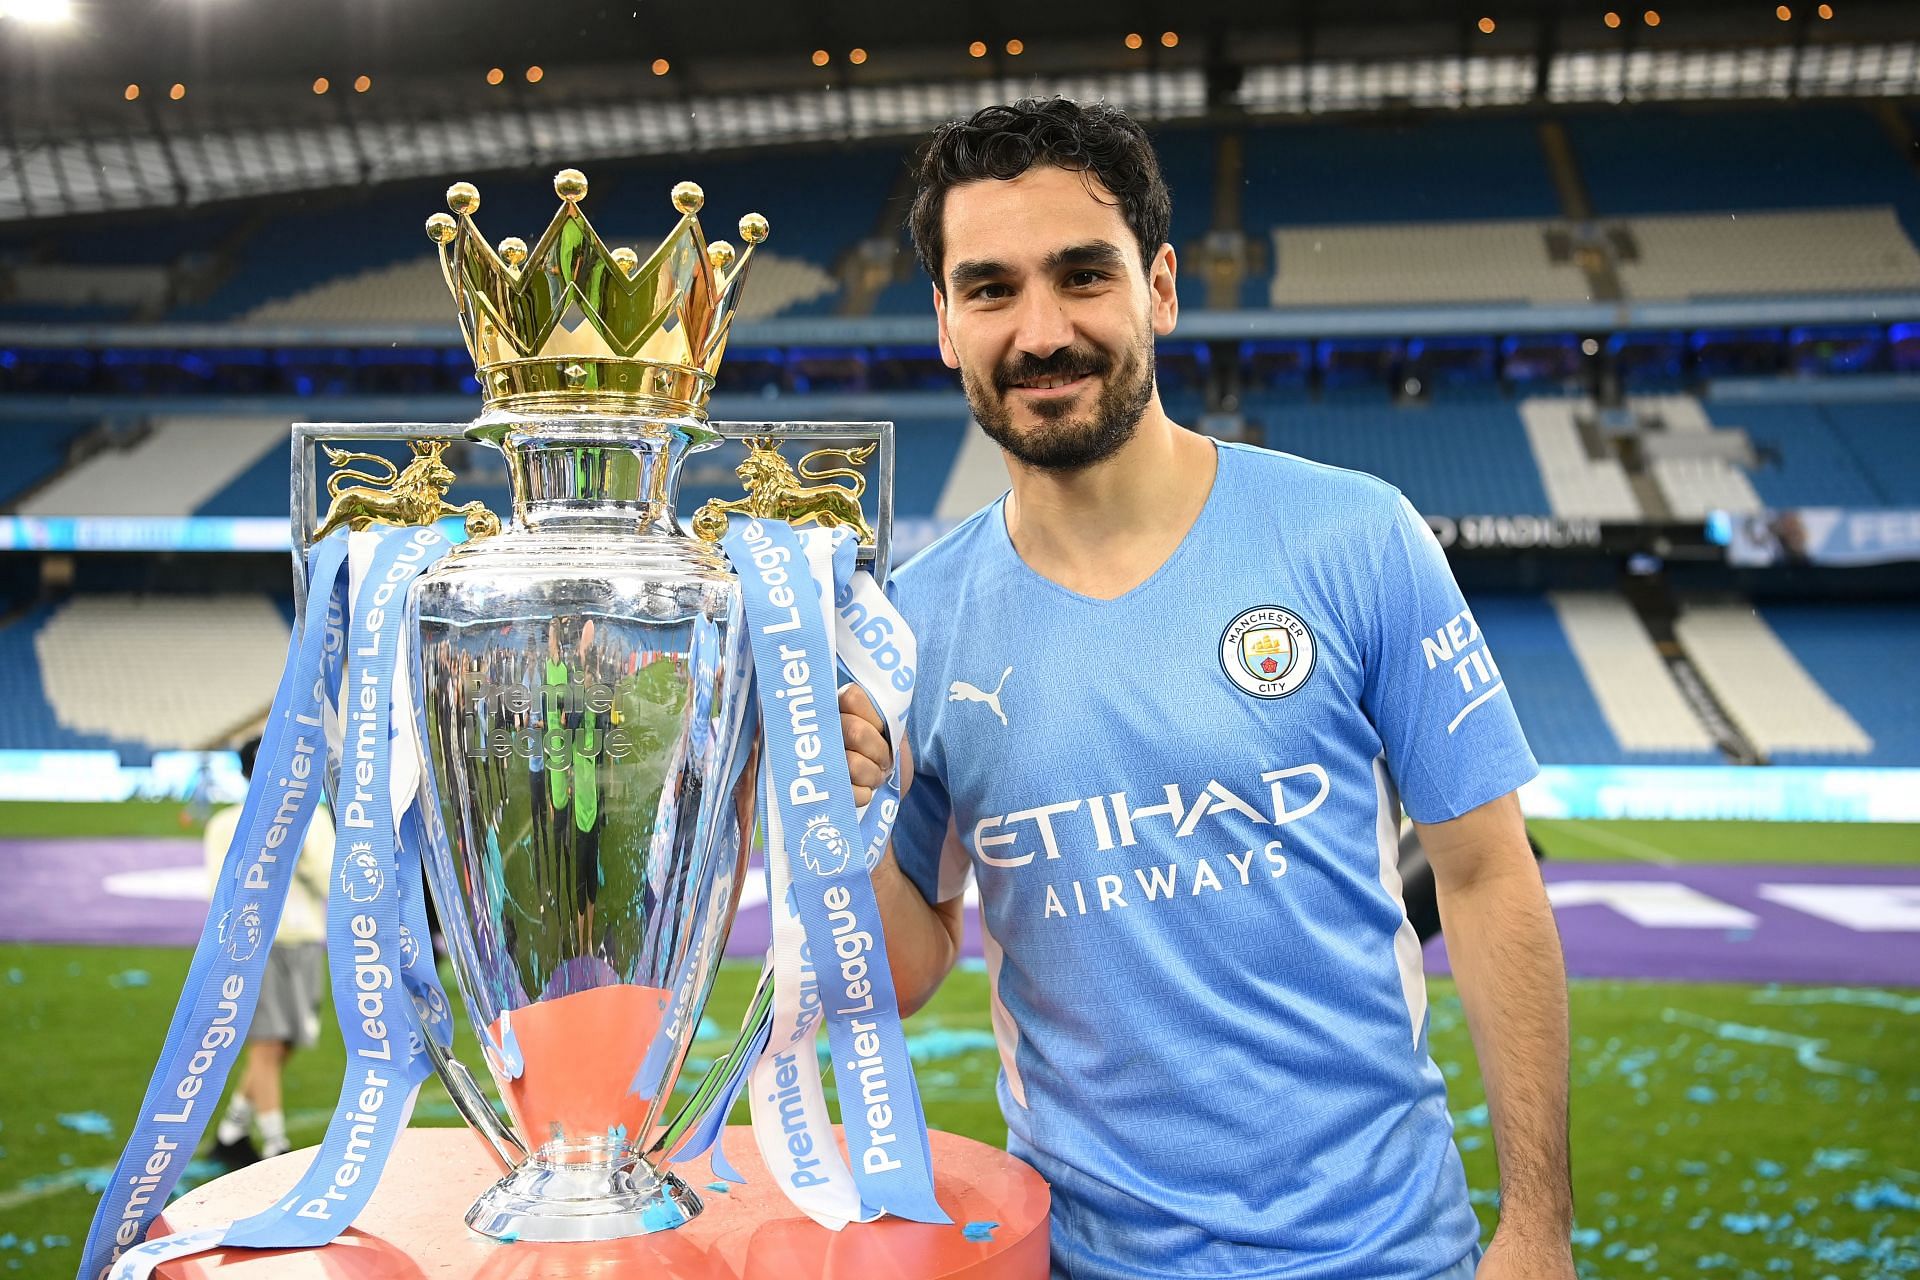 Ilkay Gundogan may have ended his City career with the Premier League